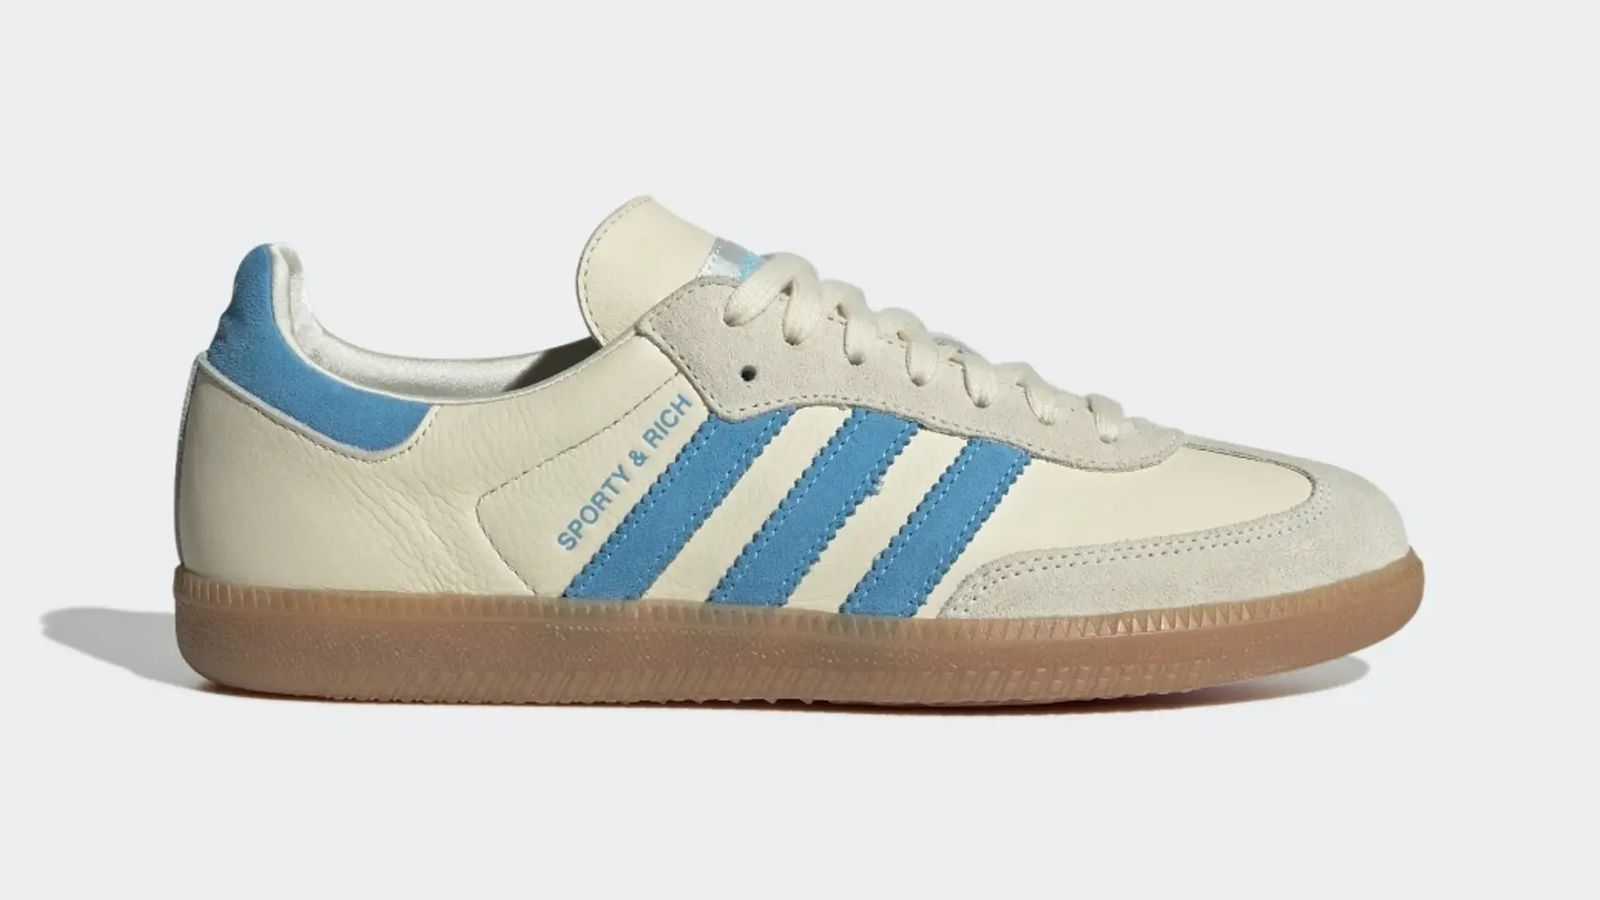 Sporty & Rich x adidas Samba "Beige Blue" product image of a cream low-top featuring light blue stripes and details and a beige rubber outsole.